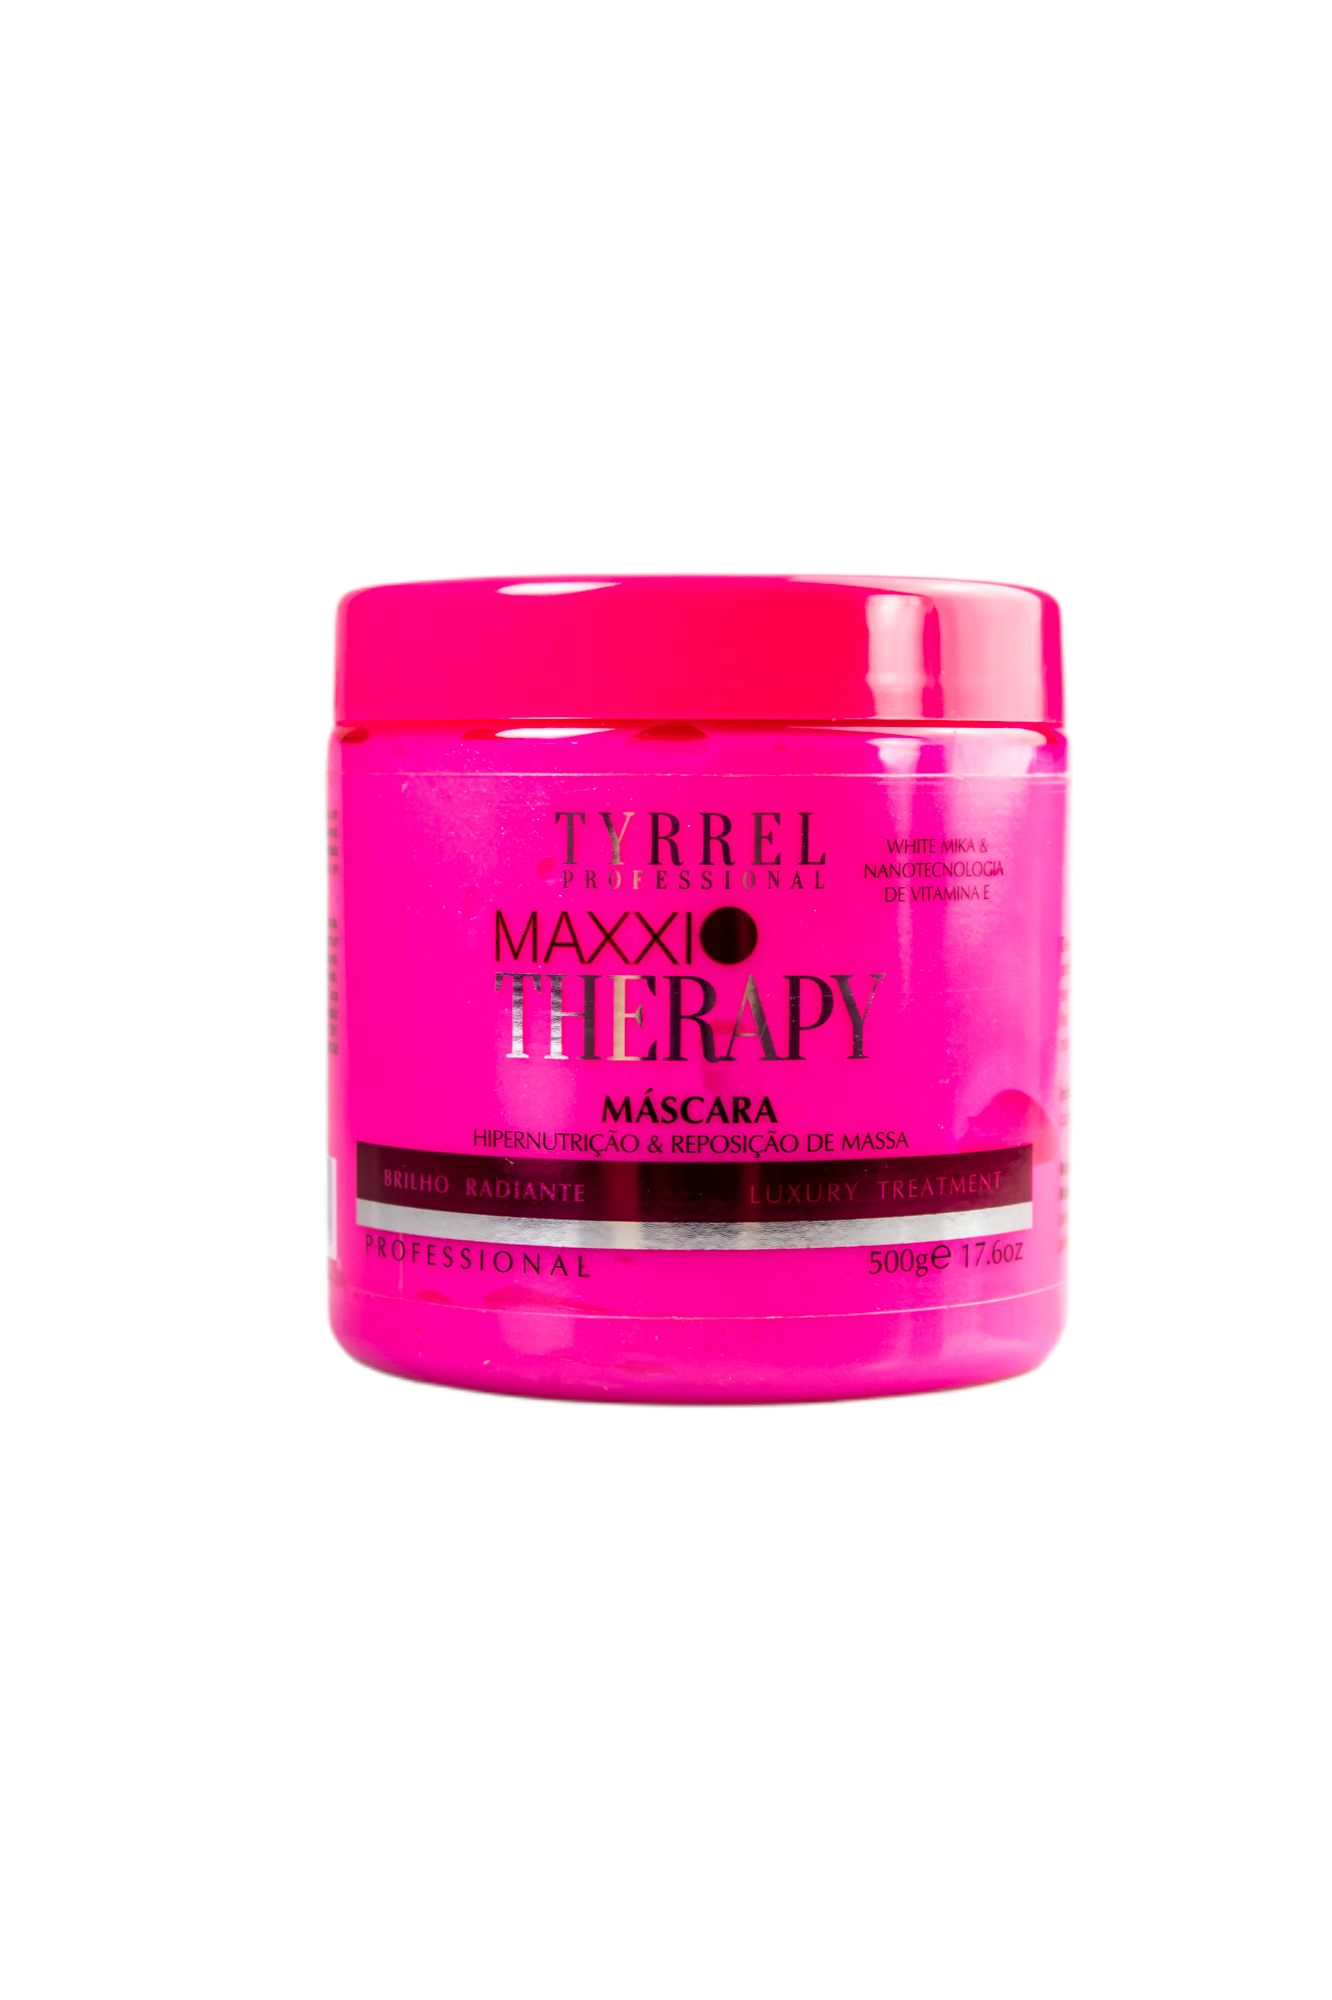 Tyrrel Hair Mask Mass Replacement Maxxi Therapy Luxury Nutrition Treatment Mask 500g - Tyrrel